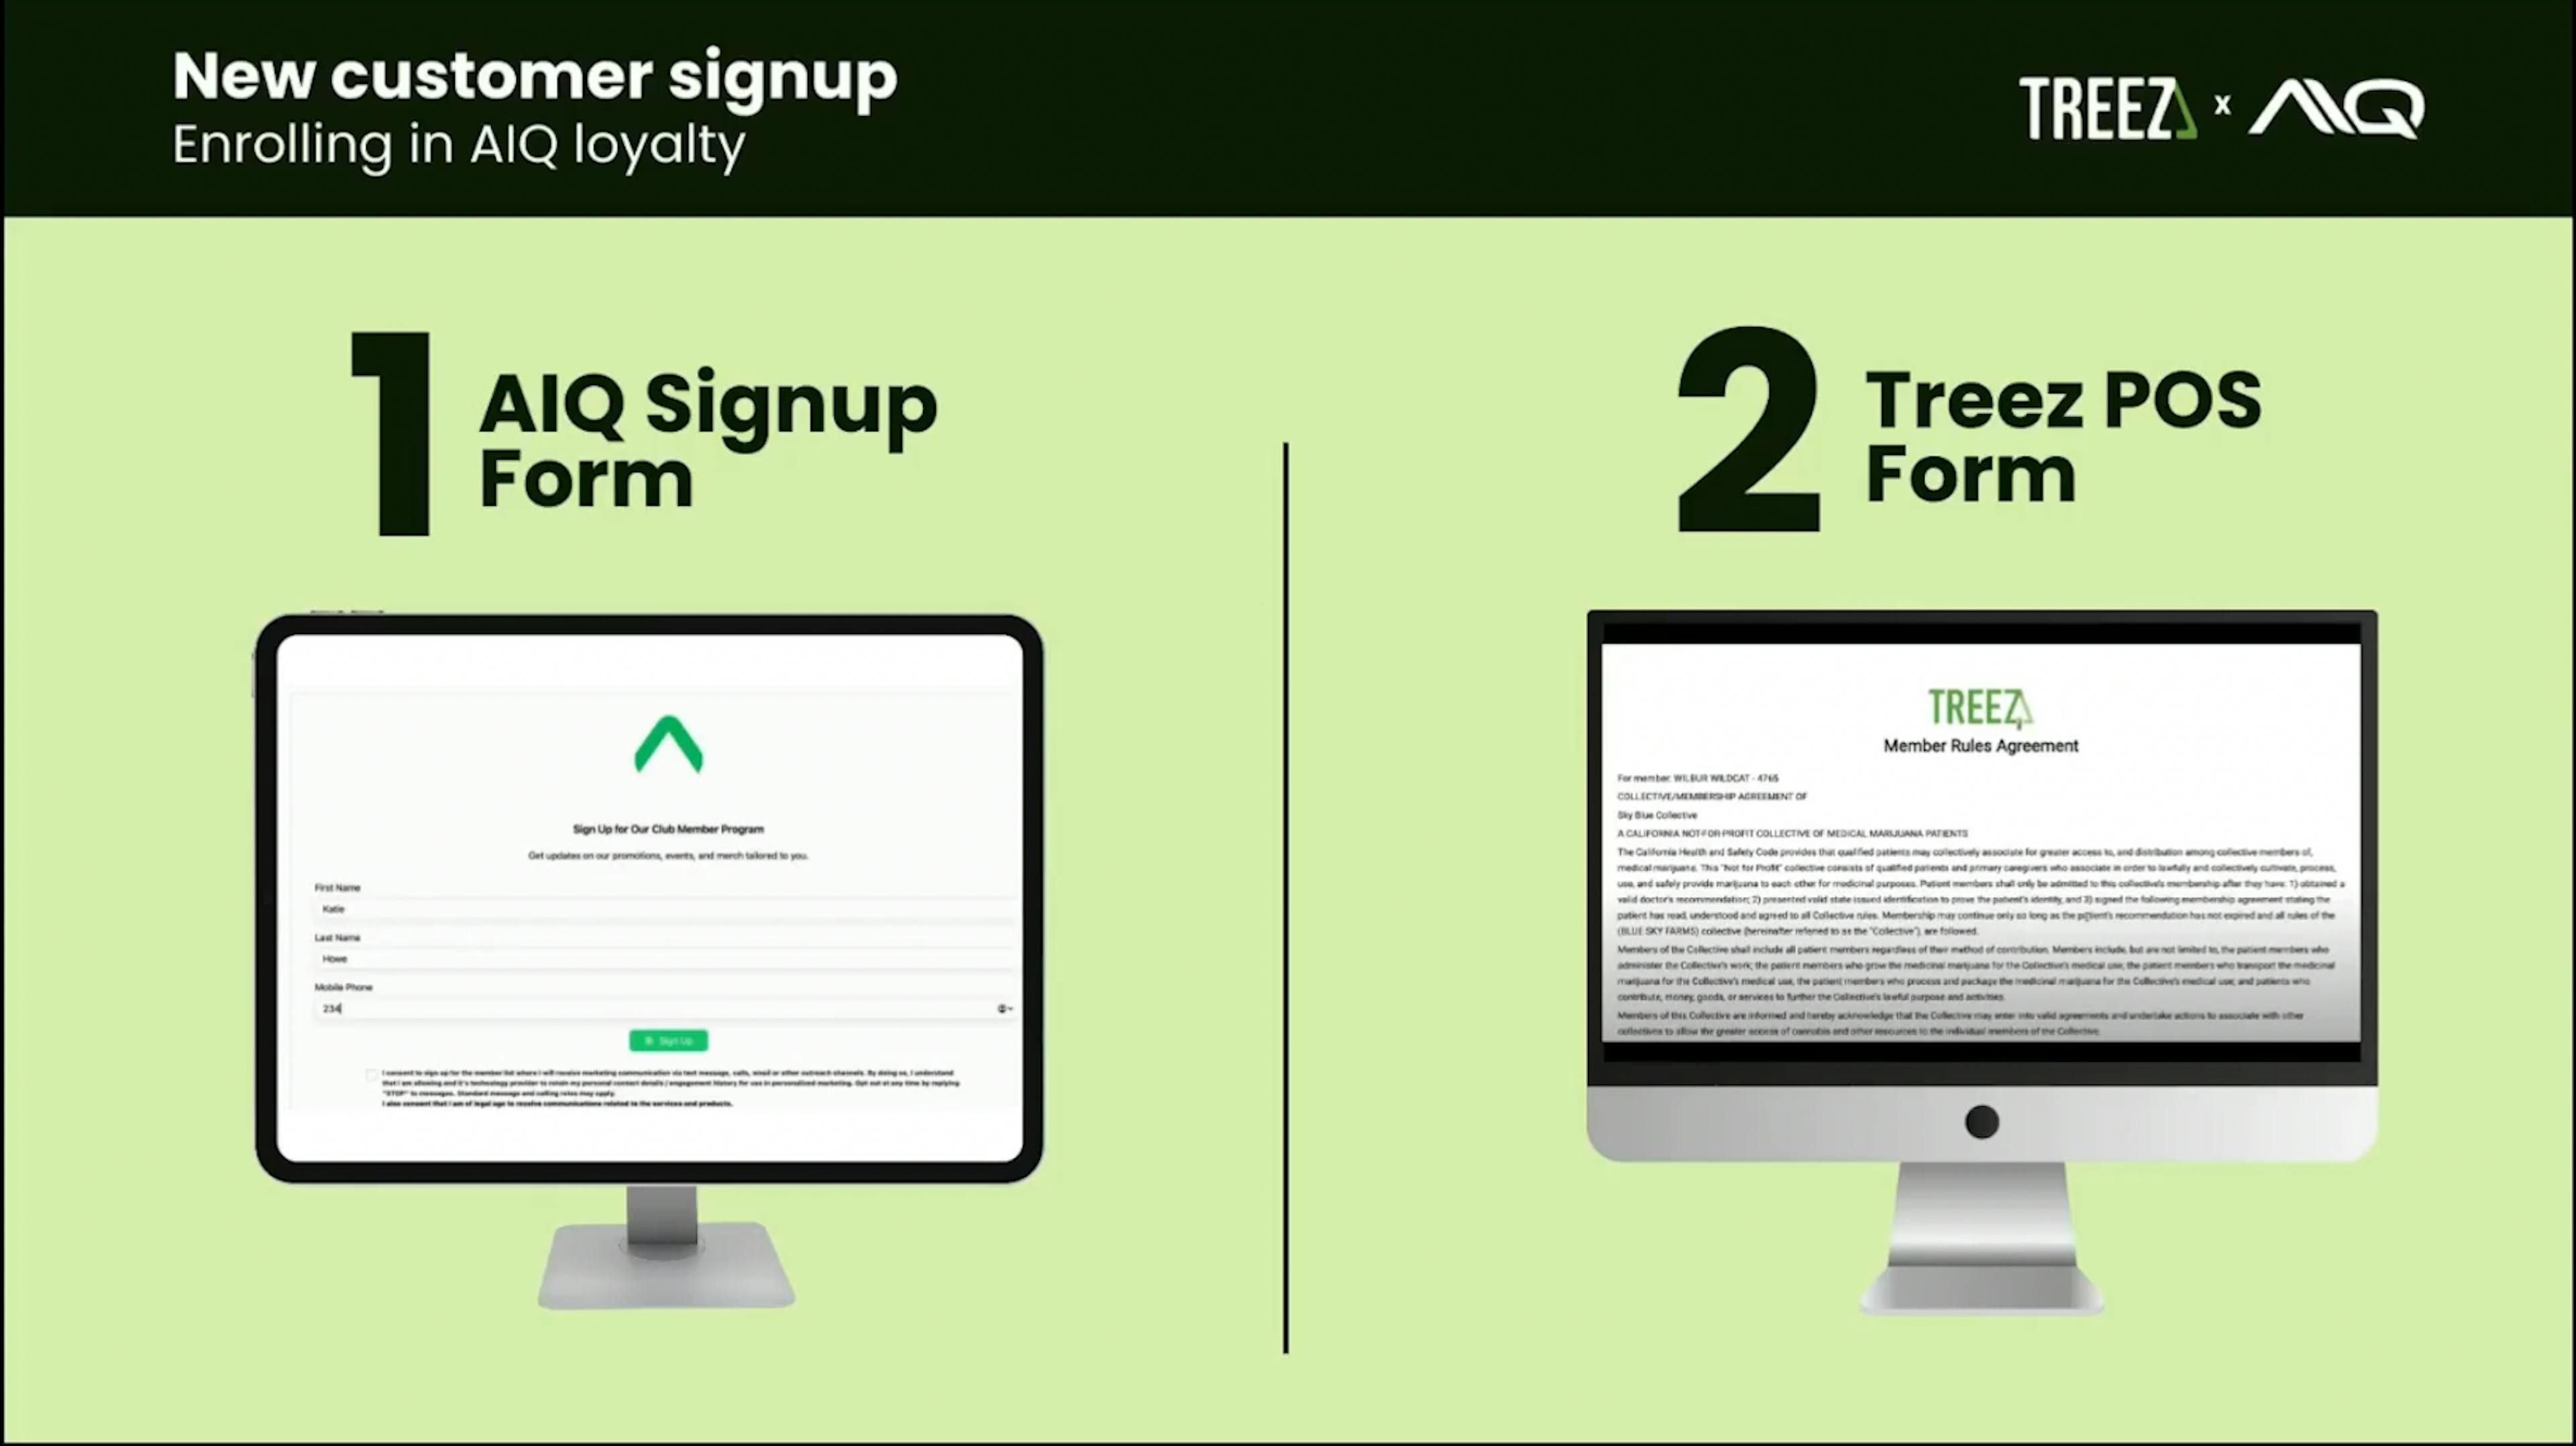 the image shows two places customers can enroll in AIQ loyalty, either in the AIQ signup form or the Treez POS form